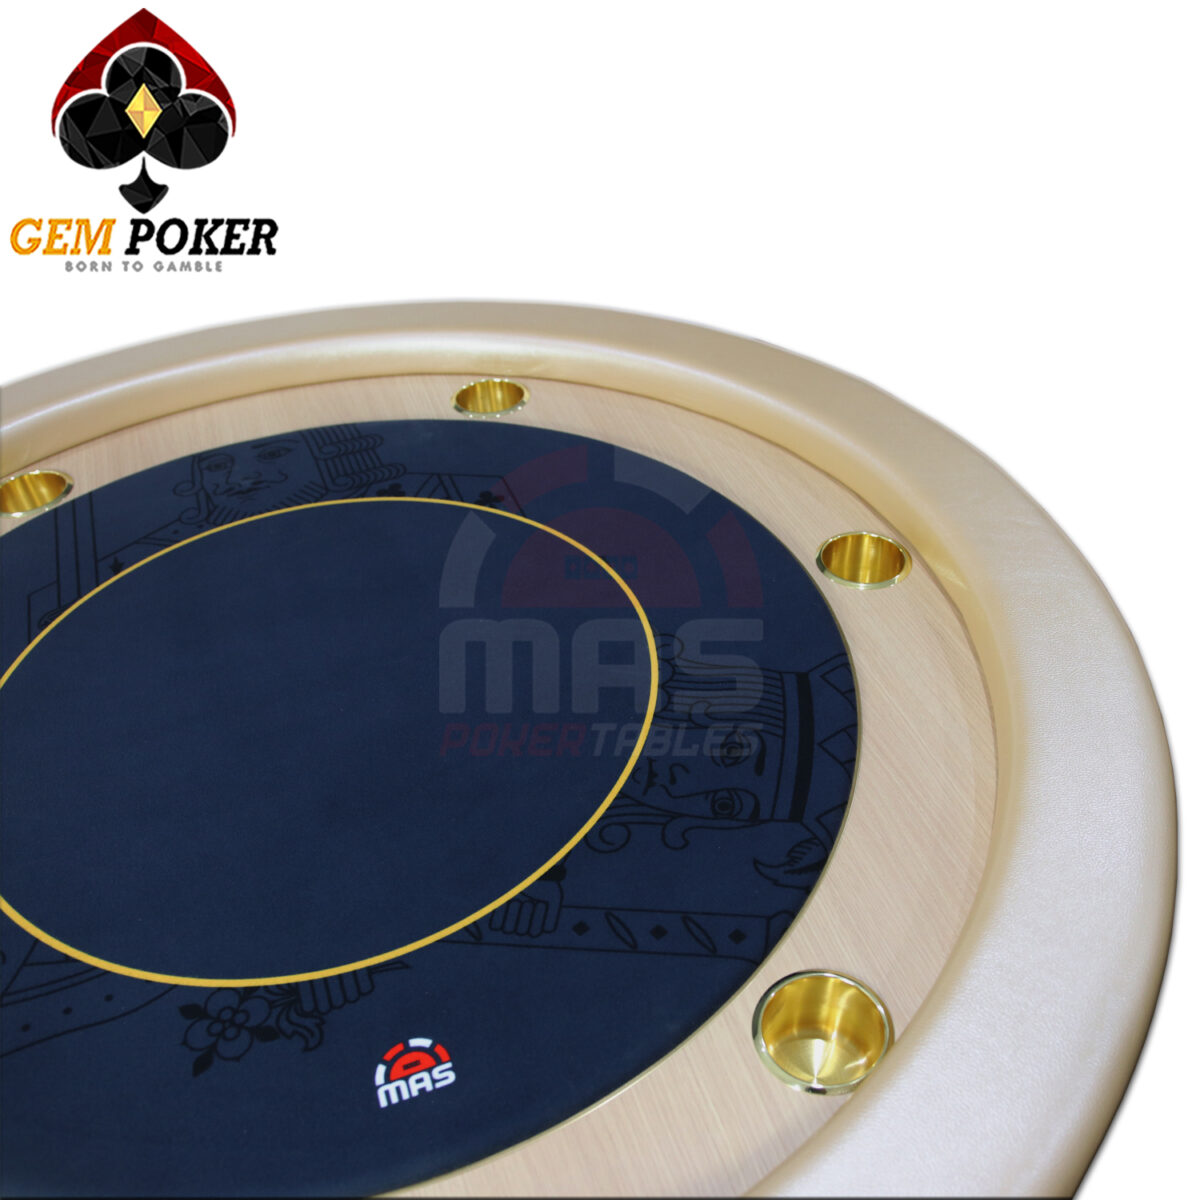 ROLL POKER TABLE WITH LACK – P55